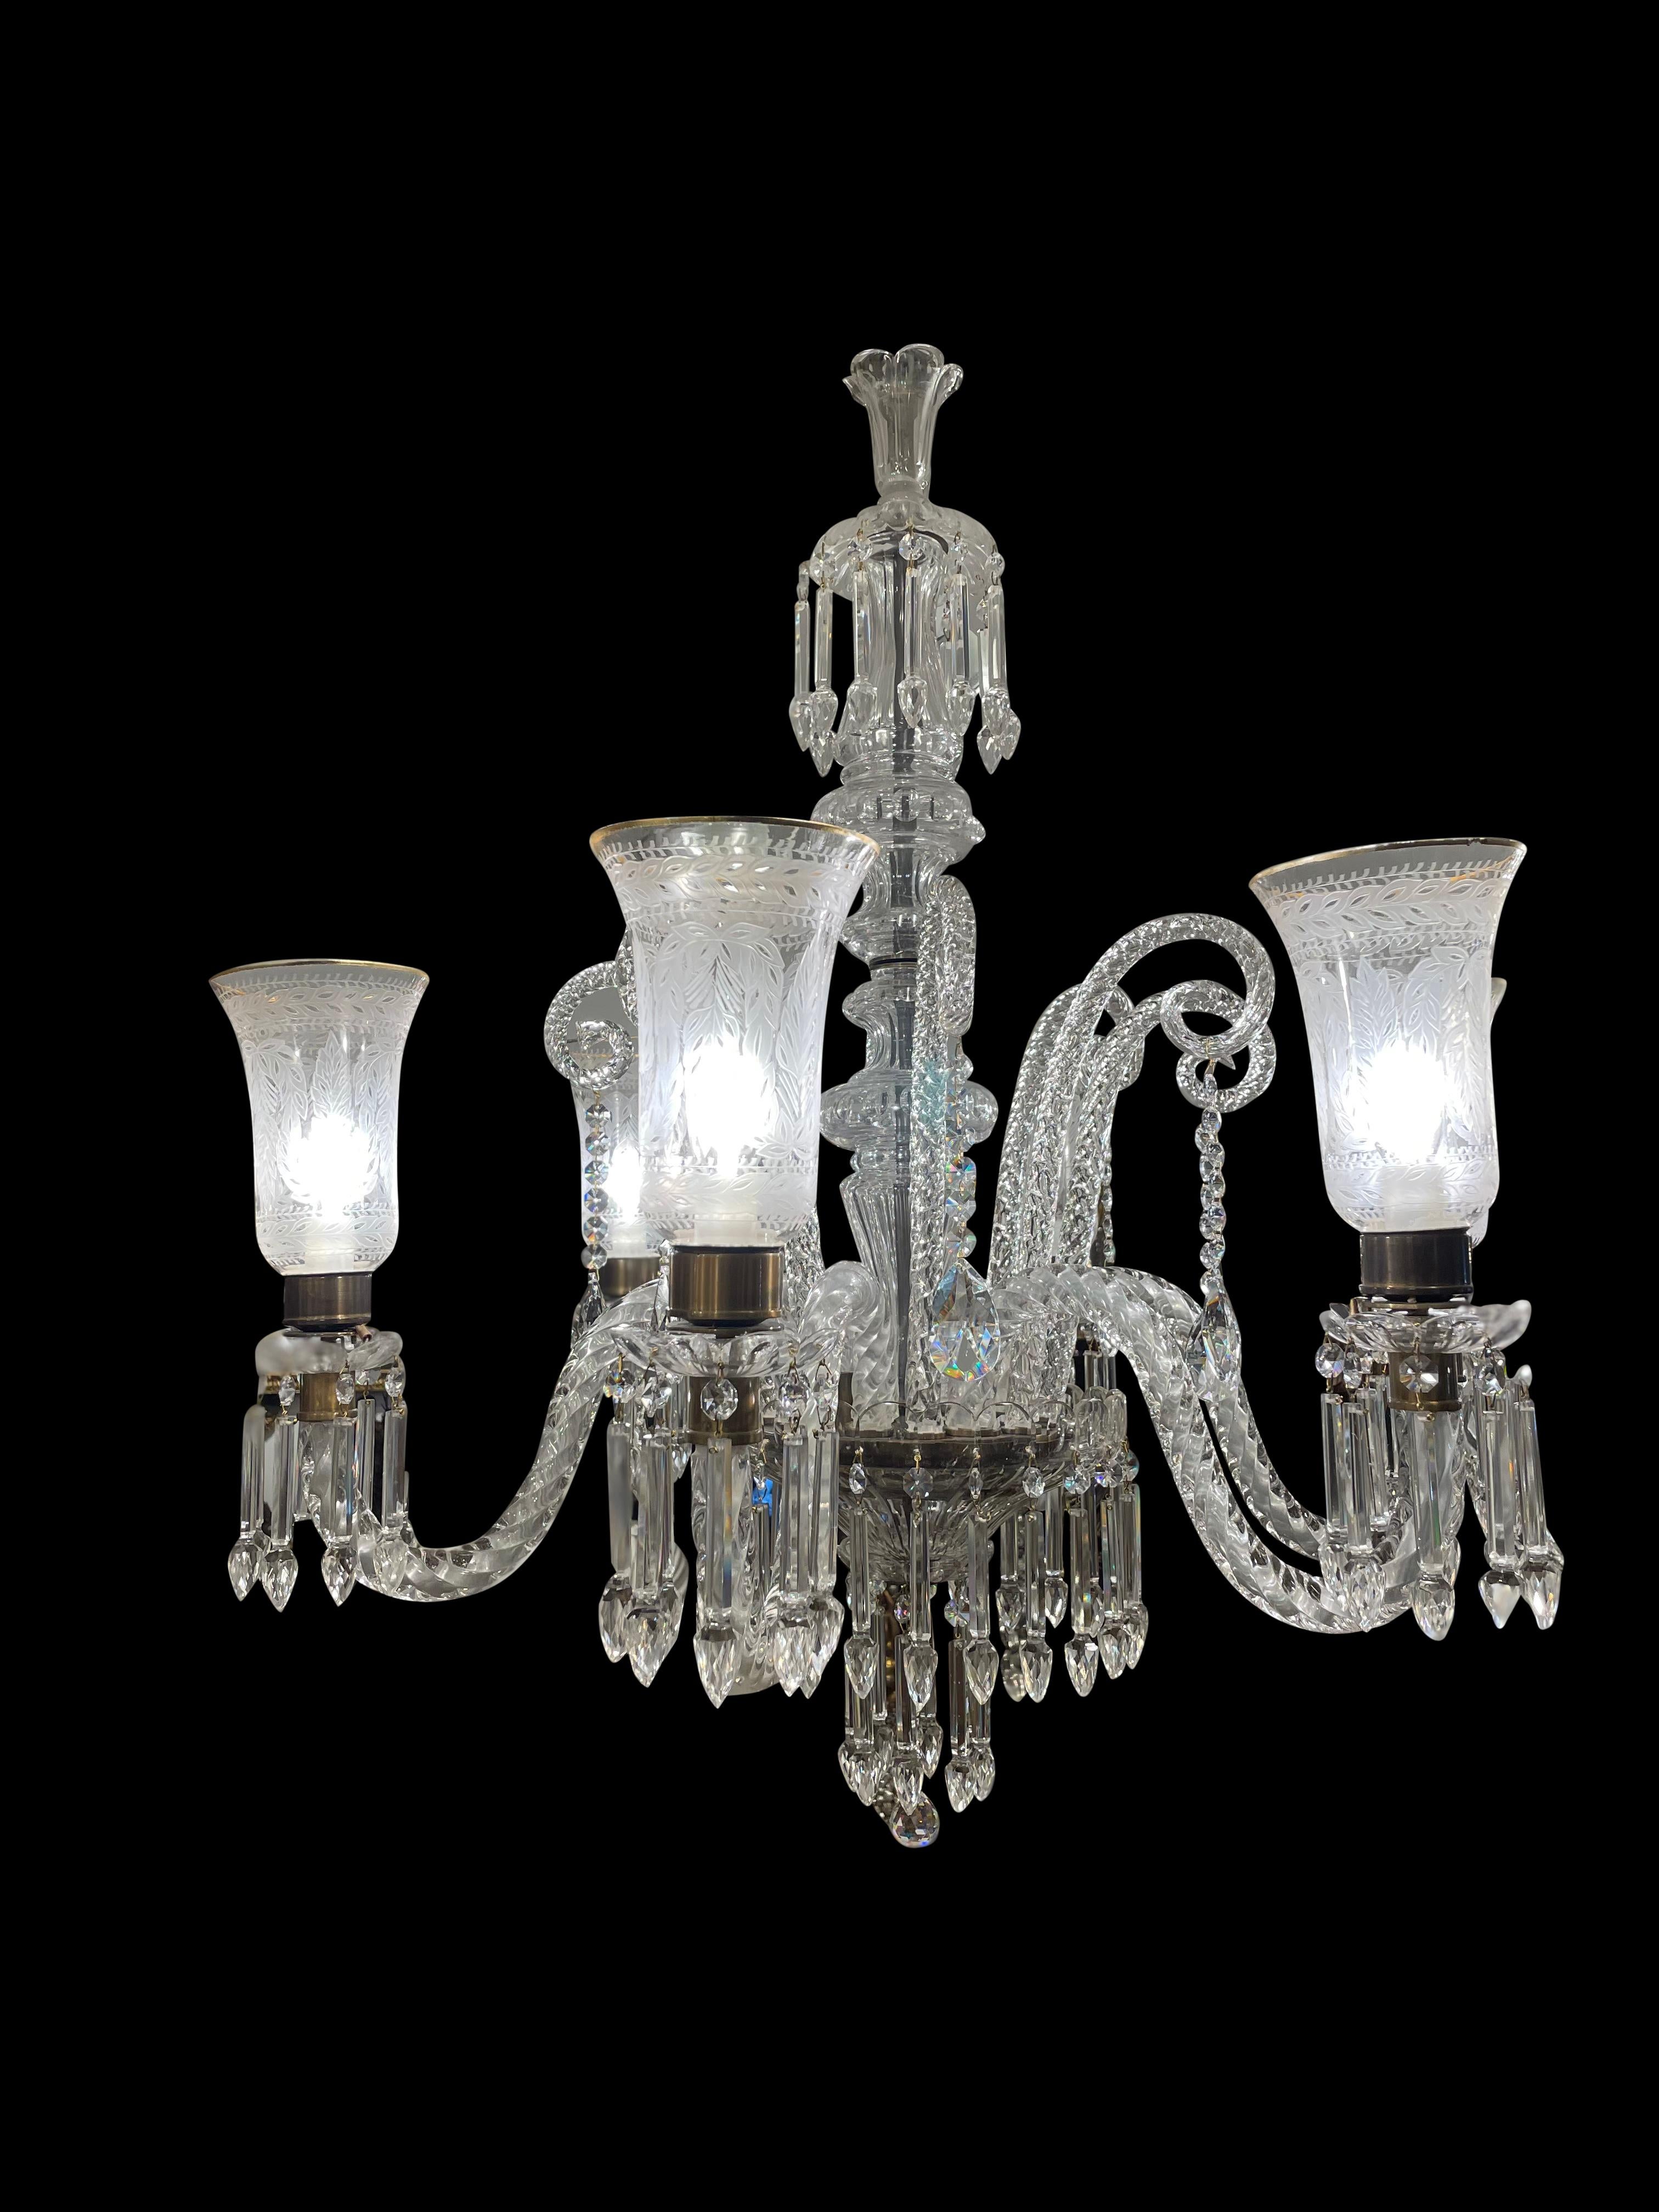 Cut Crystal Chandelier with Engraved Hurricane Shades, 20th Century For Sale 5